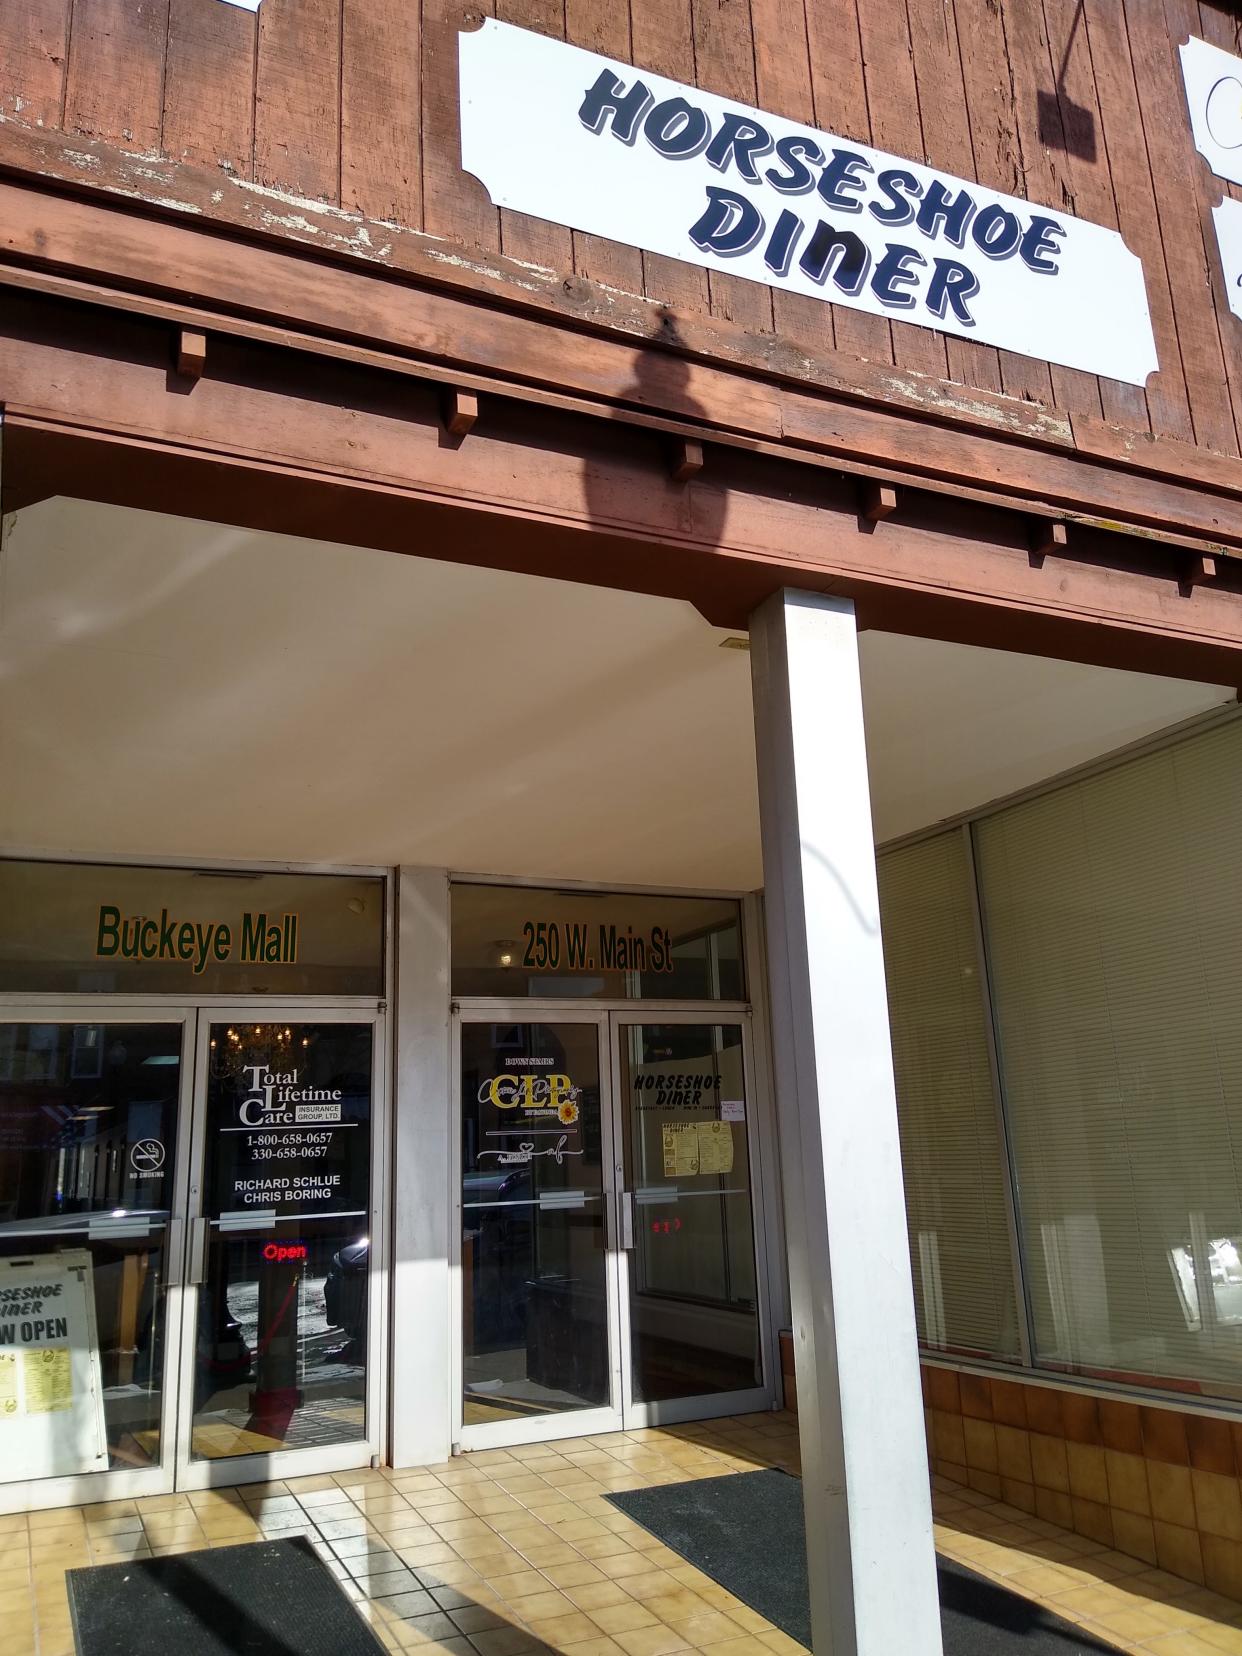 Horseshoe Diner is at 250 W. Main St. in the Buckeye Mall in Ravenna.